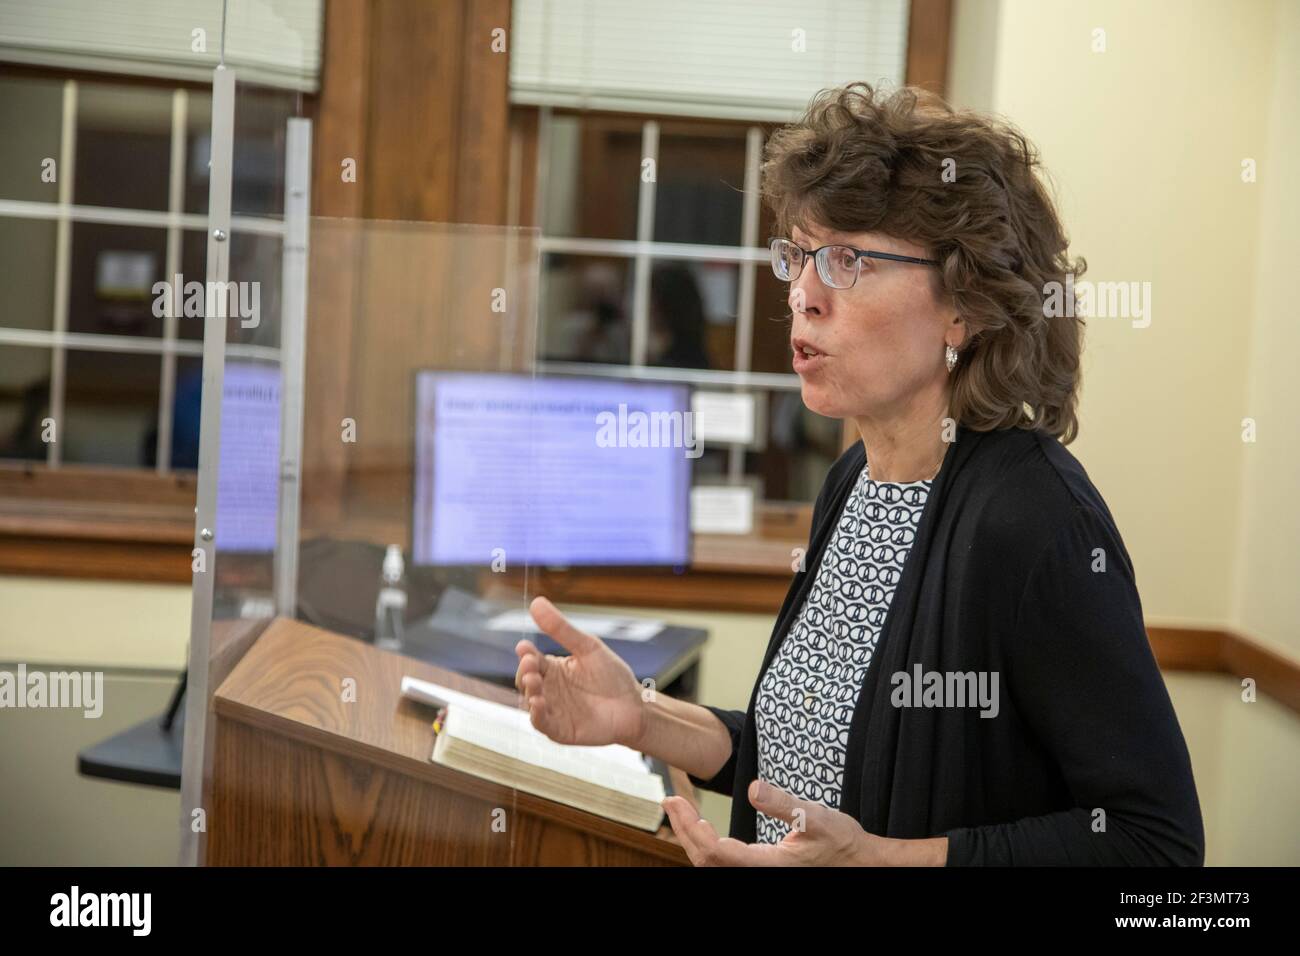 Detroit, Michigan - Dr. Mary Healy, professor of Sacred Scripture at Sacred Heart Major Seminary, teaches a class to deacon candidates on the Synoptic Stock Photo